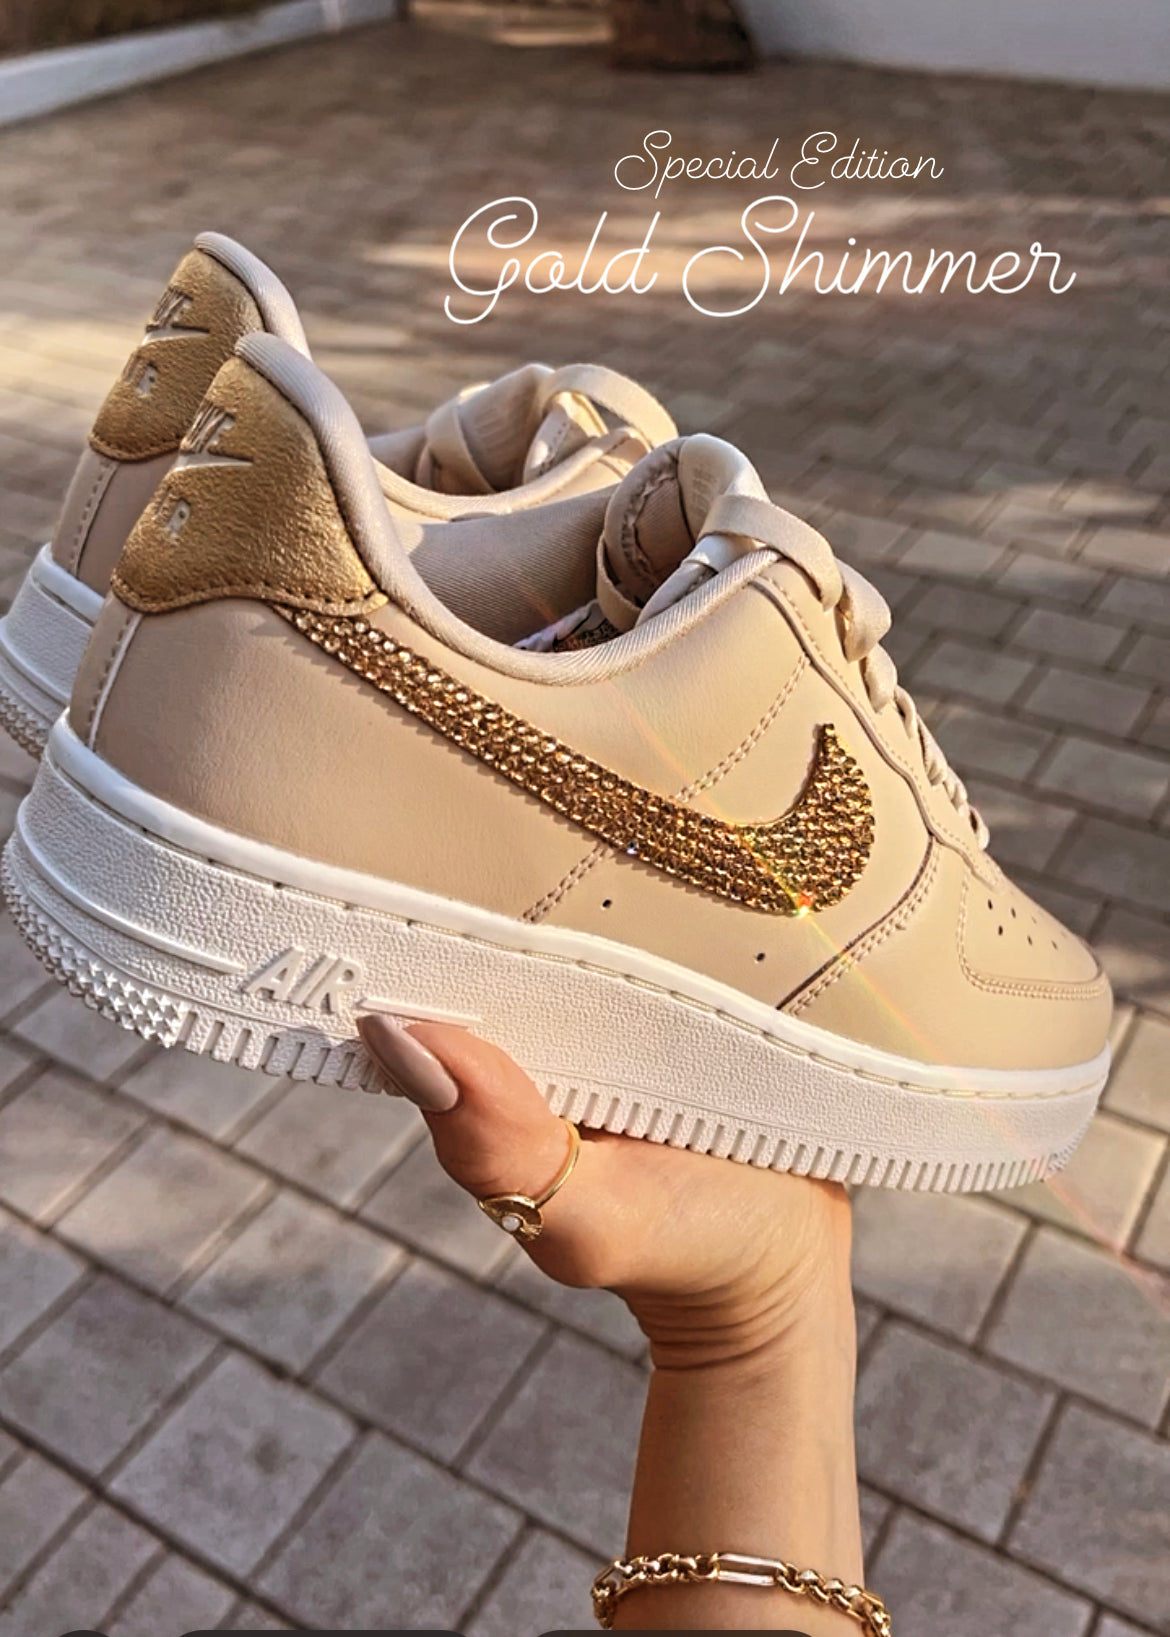 nike air force 1 limited edition